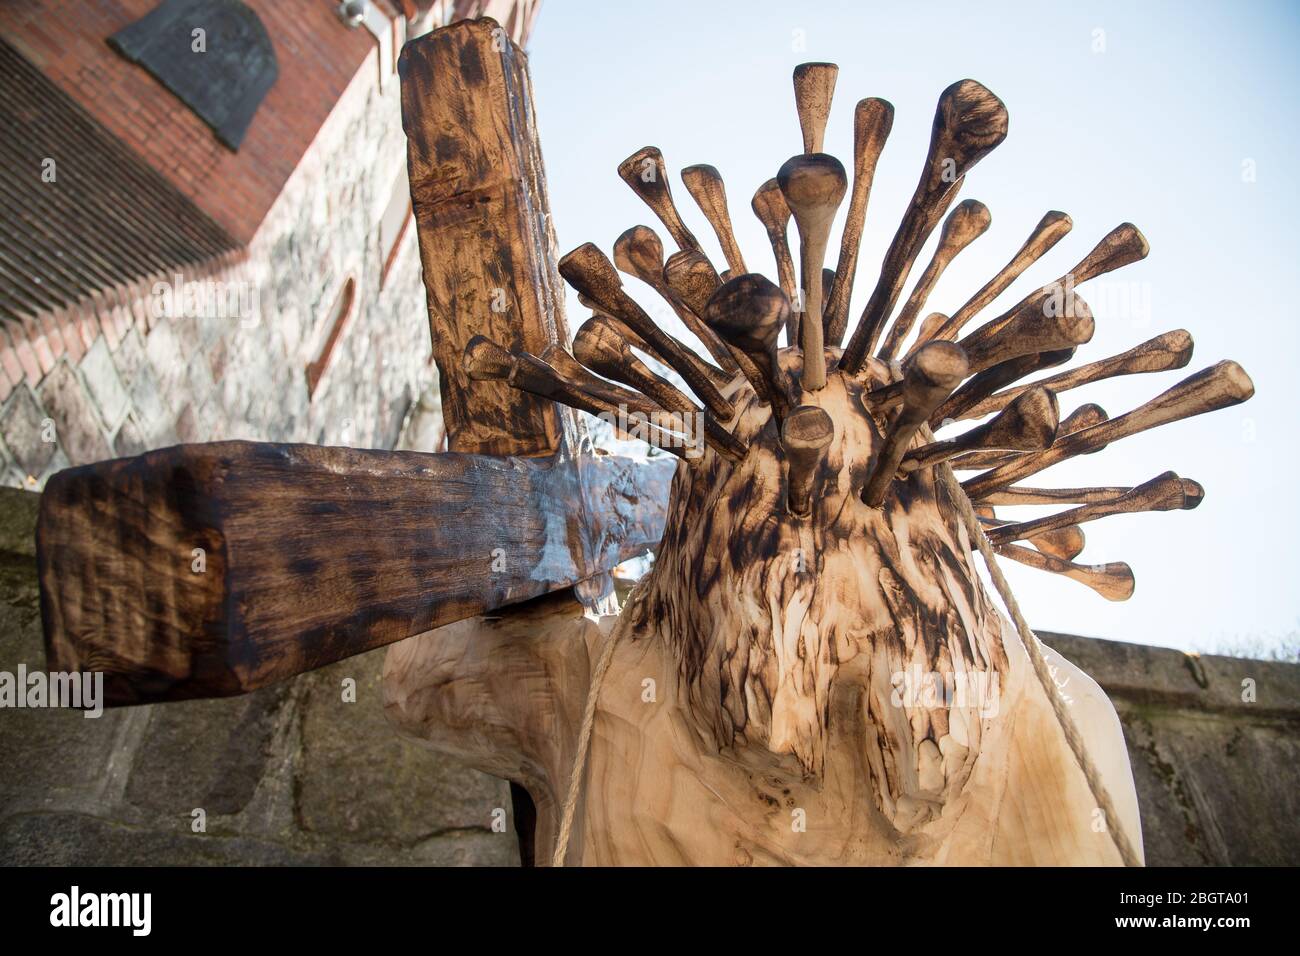 Wooden sculpture of Jesus Christ wearing a crown in the shape of a coronavirus in Sopot, Poland. April 11th 2020 © Wojciech Strozyk / Alamy Stock Phot Stock Photo